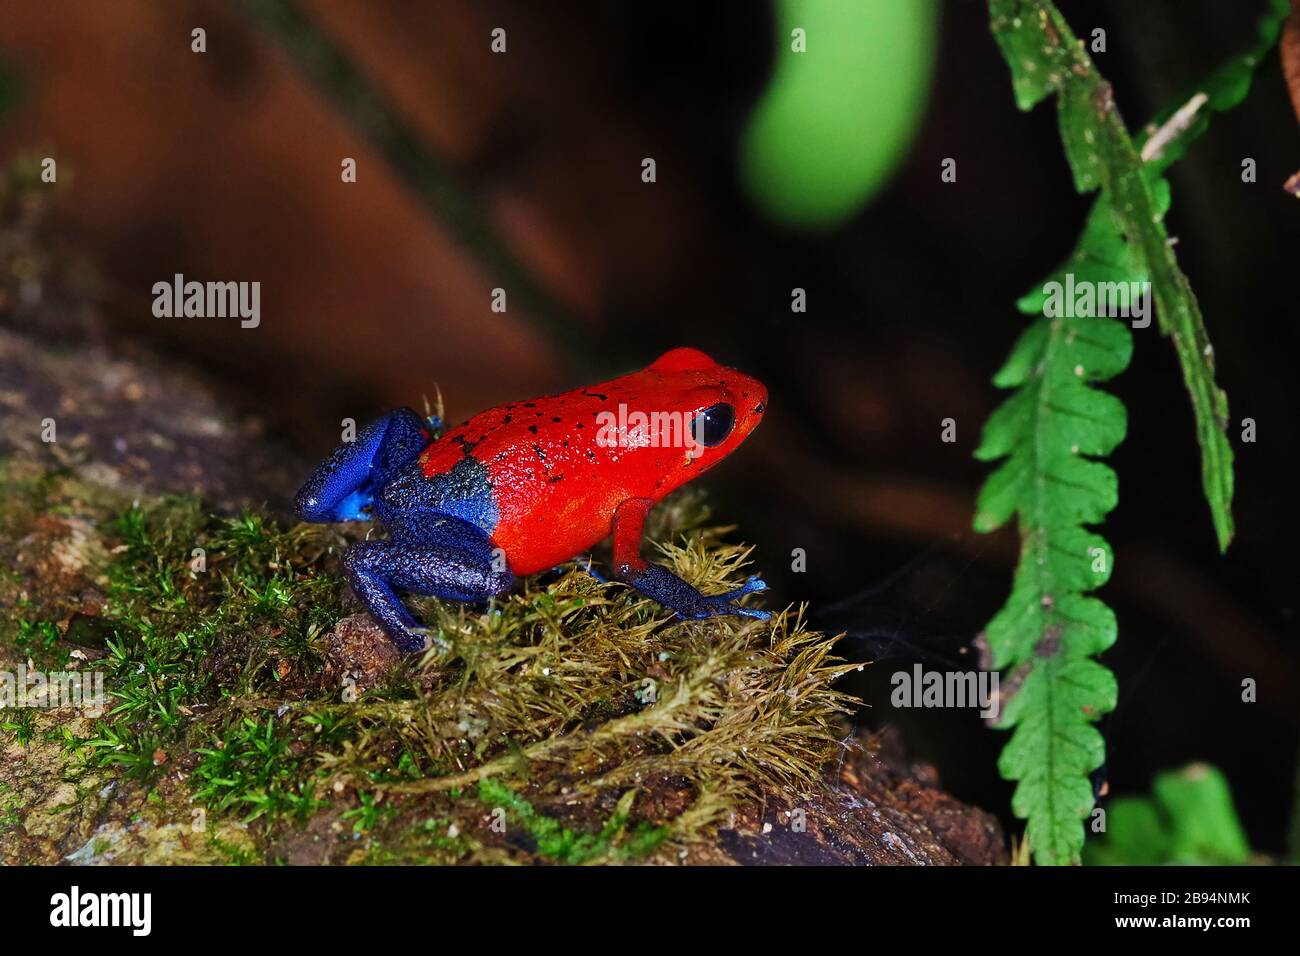 The strawberry poison-dart frog (Oophaga pumilio) from Costa Rica Stock Photo